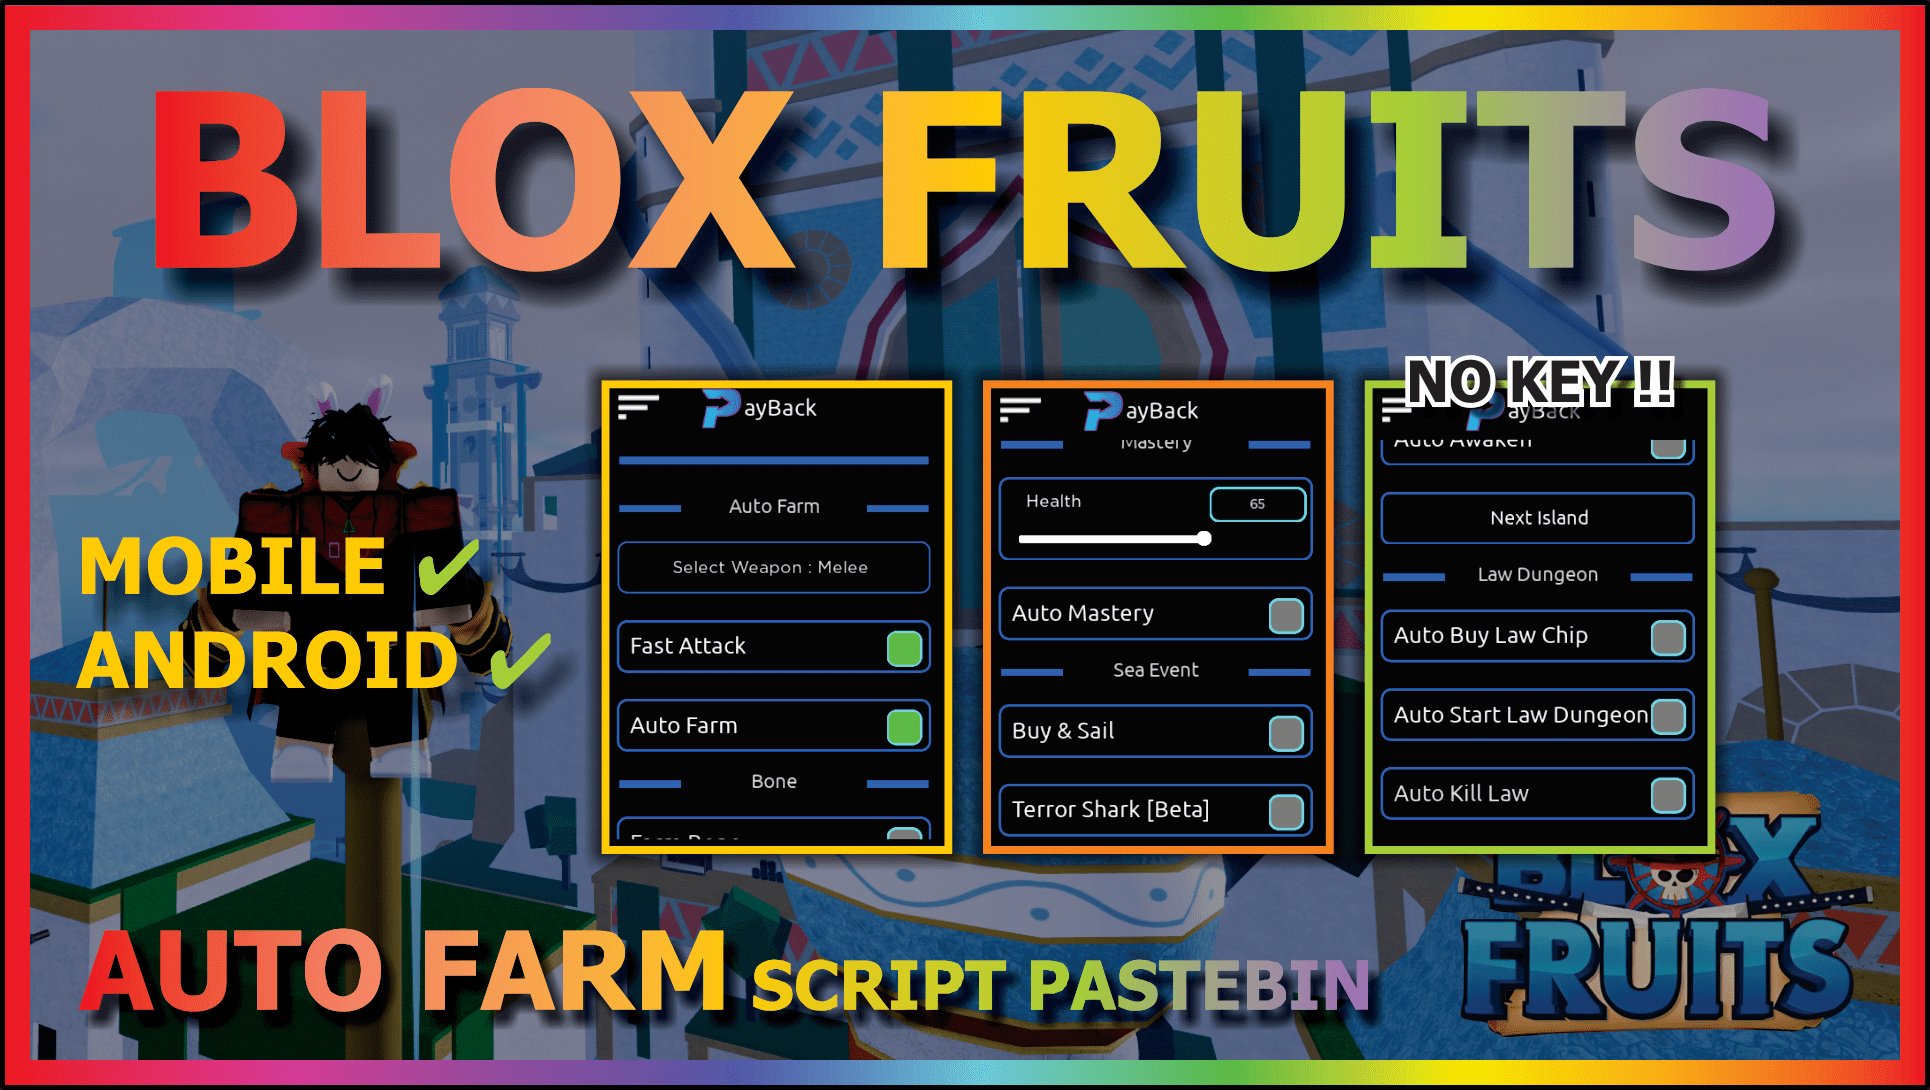 You are currently viewing BLOX FRUITS (PAYBACK)